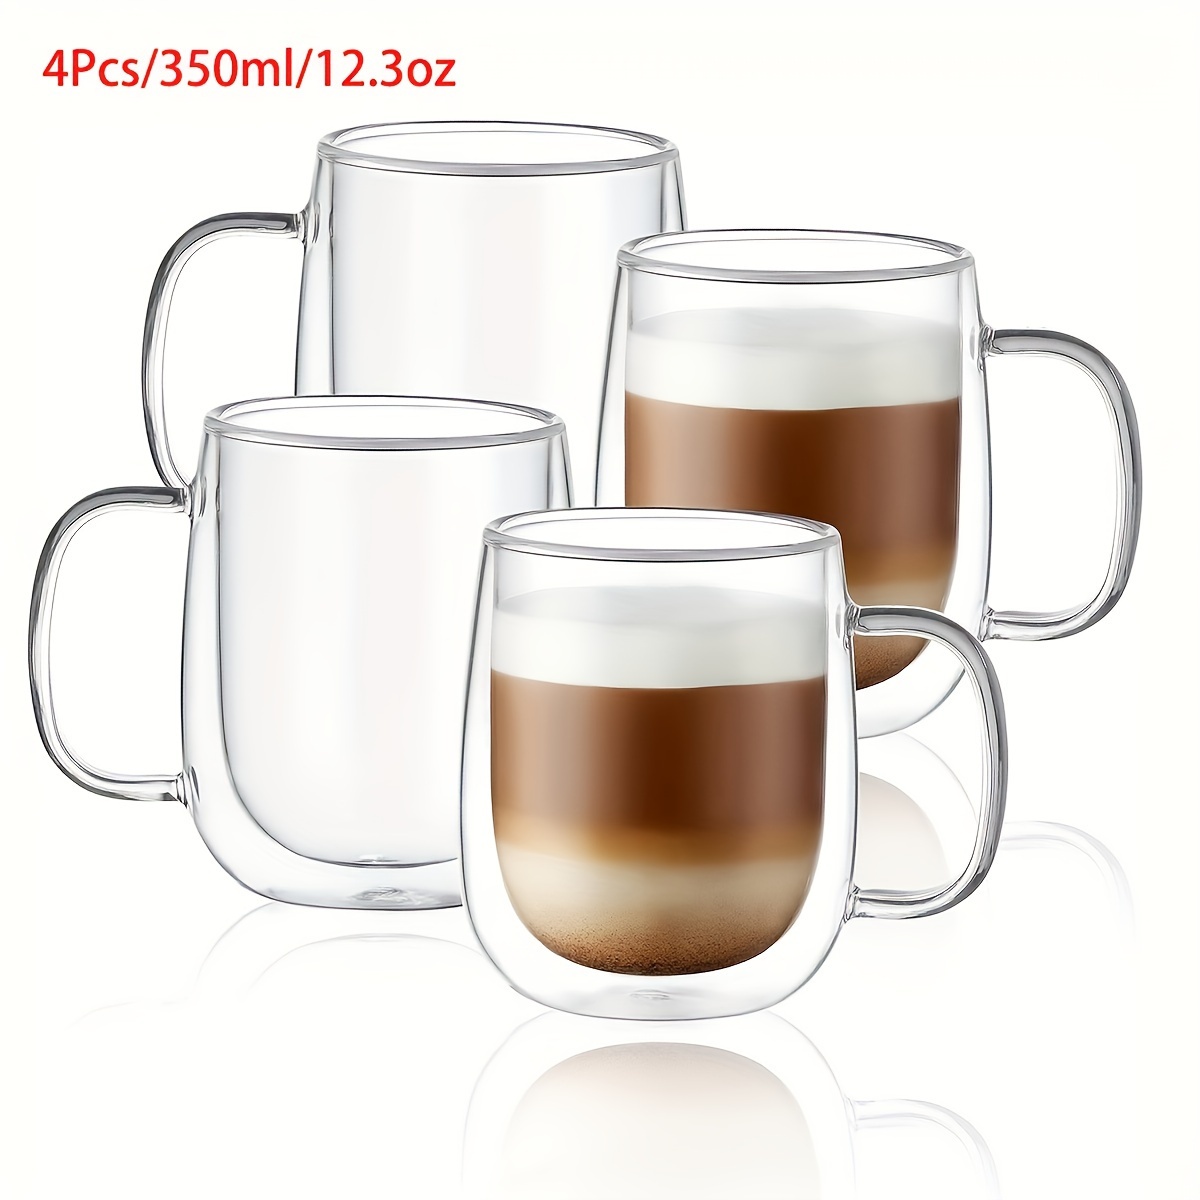 

4pcs, Glass Coffee Mugs, 250ml/350ml Double-walled Espresso Coffee Cups, Heat Insulated Water Cups, Summer Winter Drinkware, Birthday Gifts